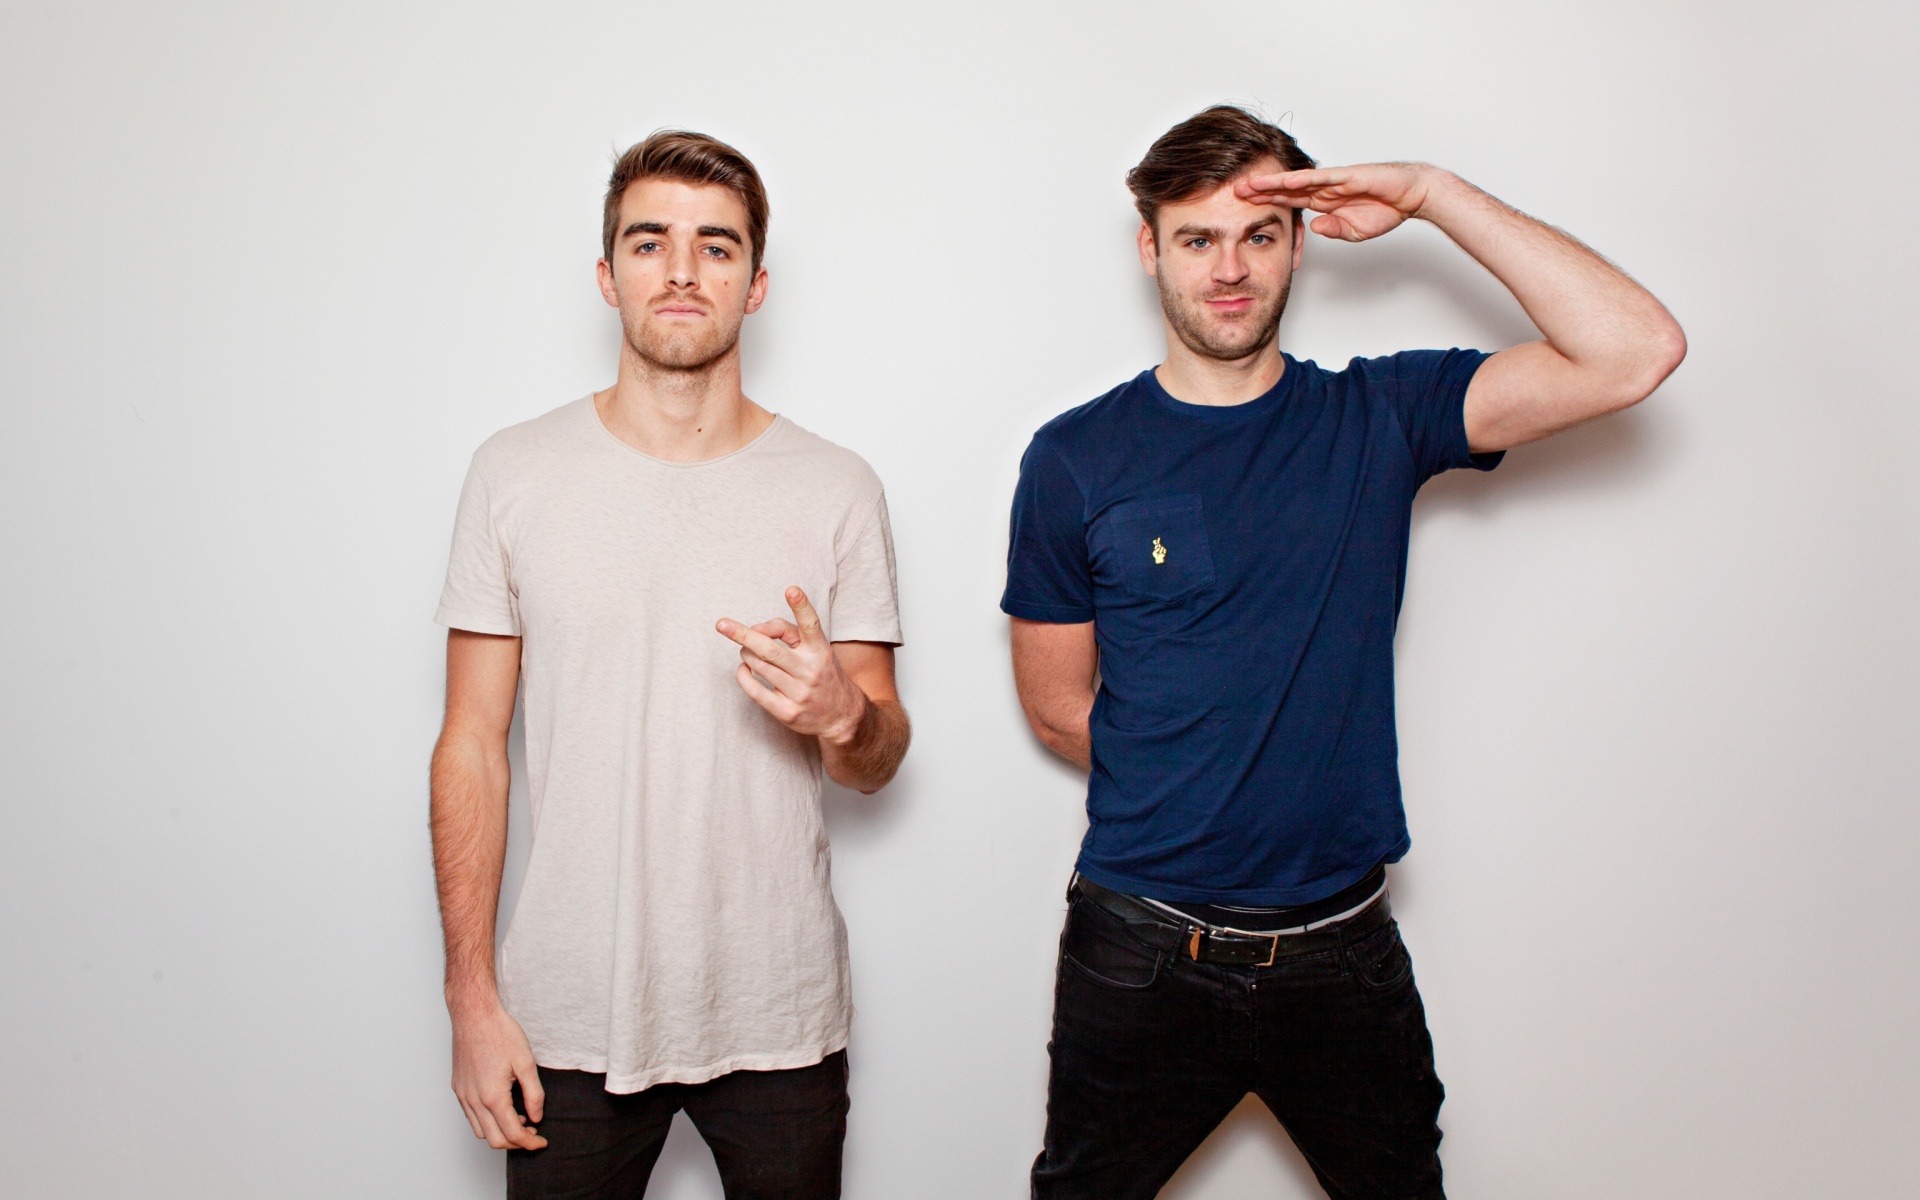 Das The Chainsmokers with Andrew Taggart and Alex Pall Wallpaper 1920x1200